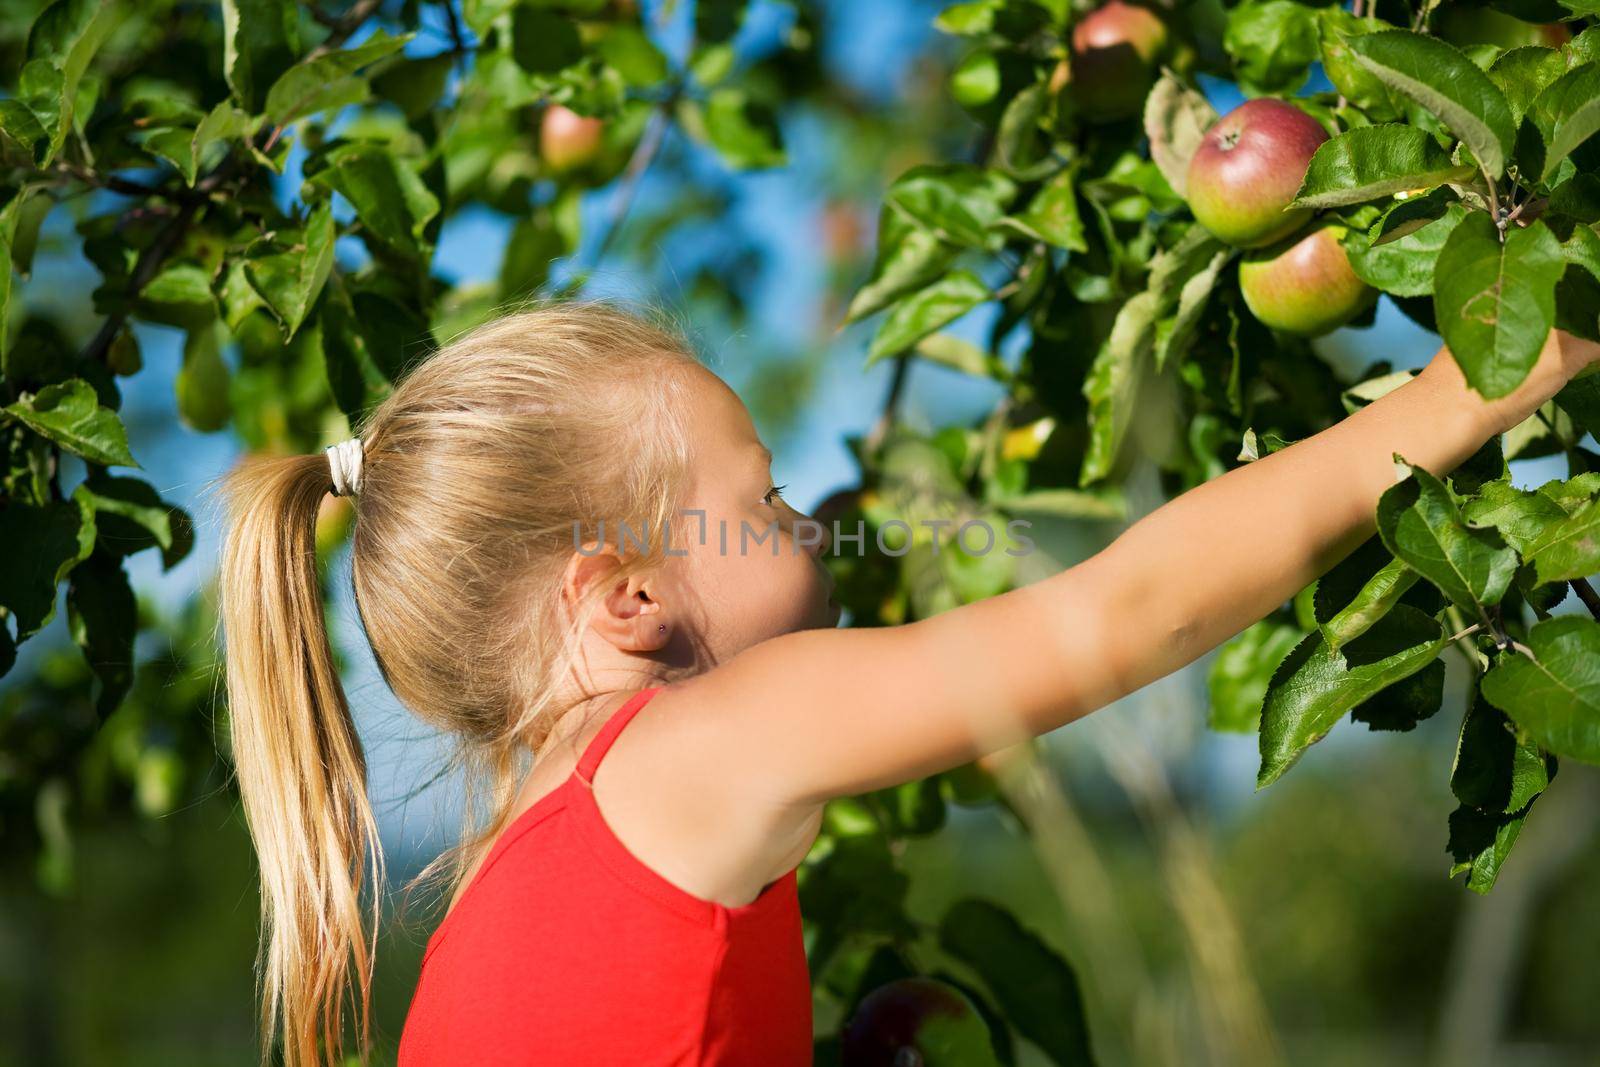 A little girl picking an apple from the tree